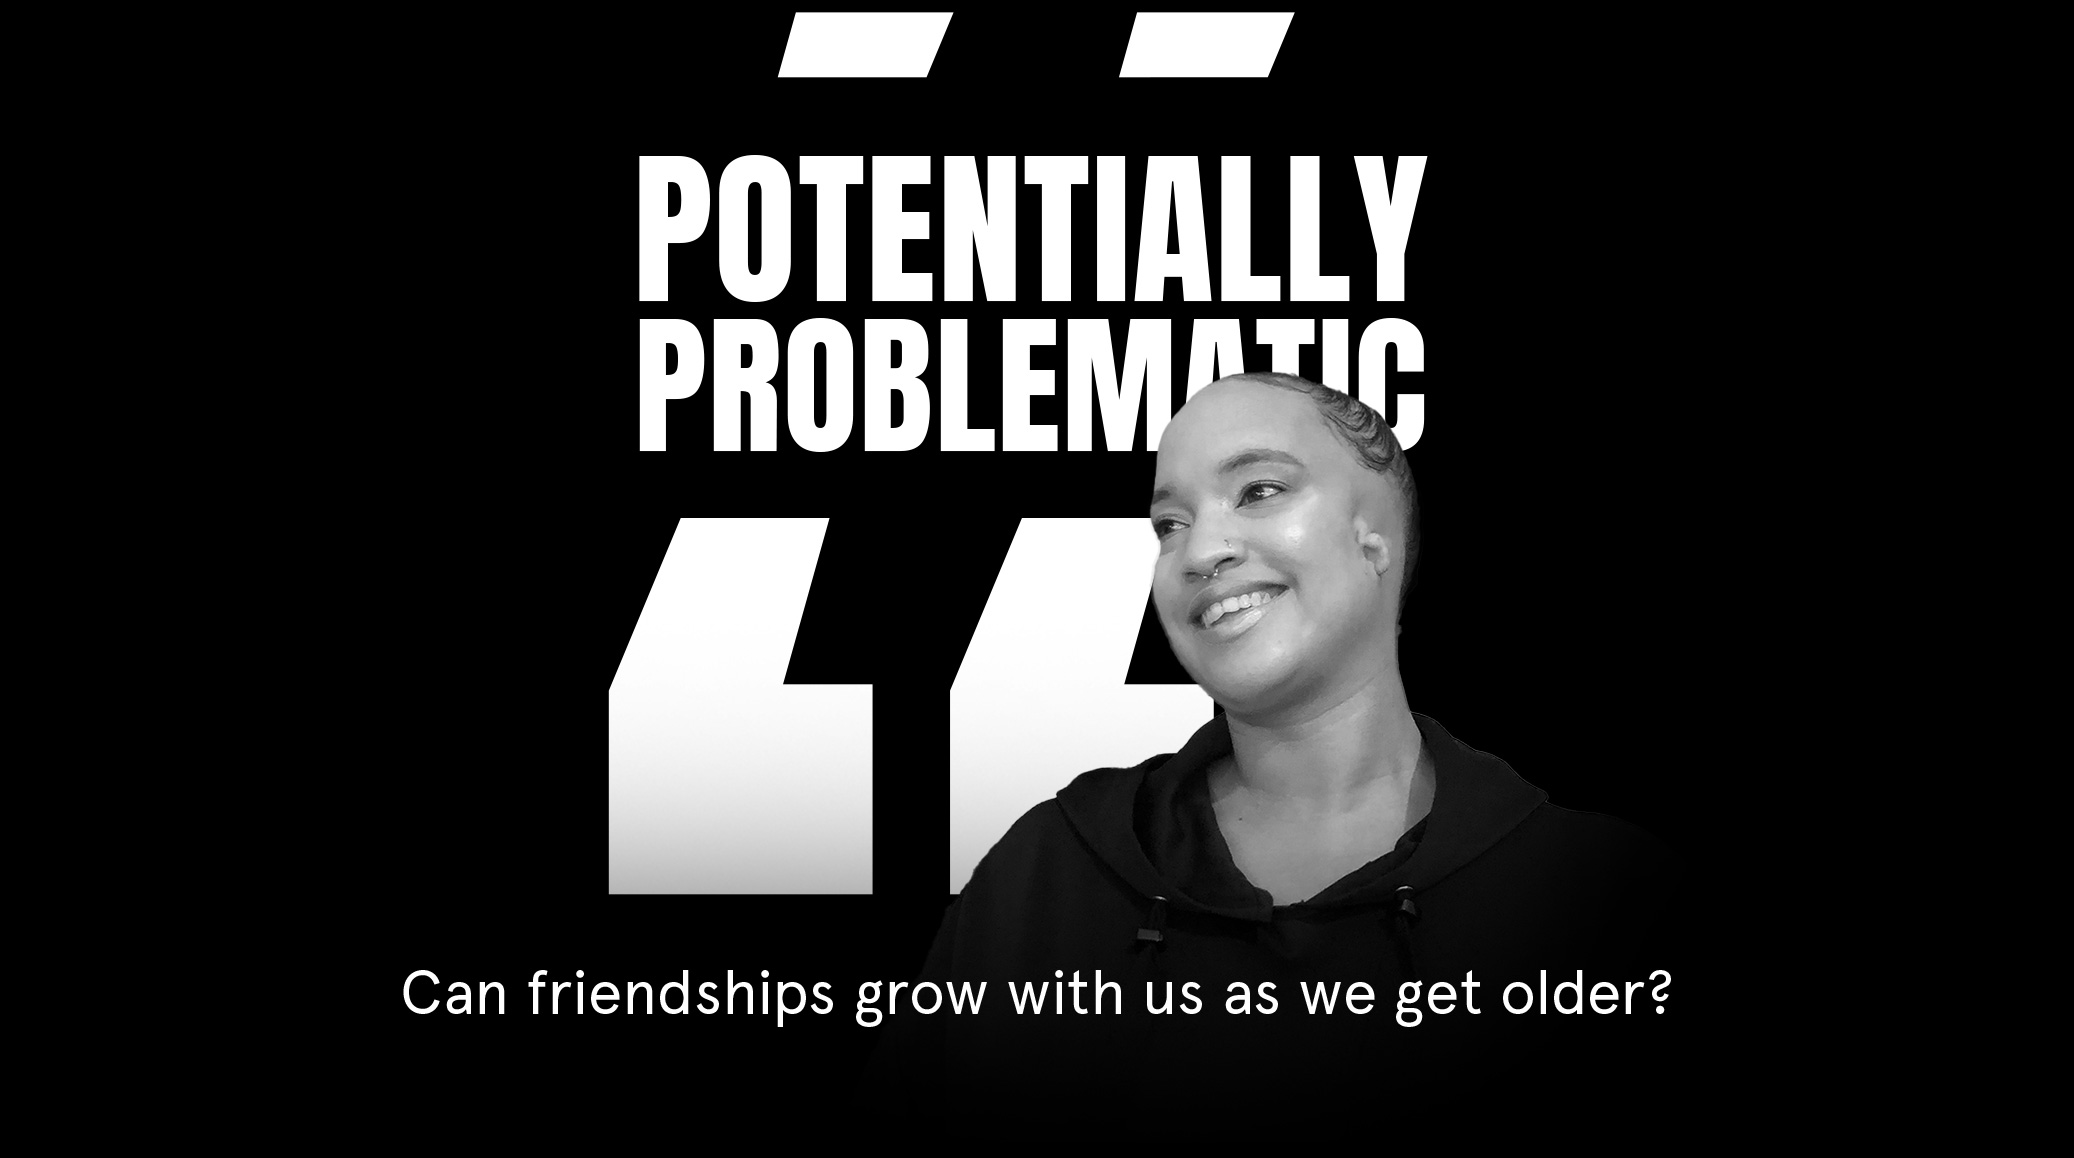 Can friendships grow with us as we get older?